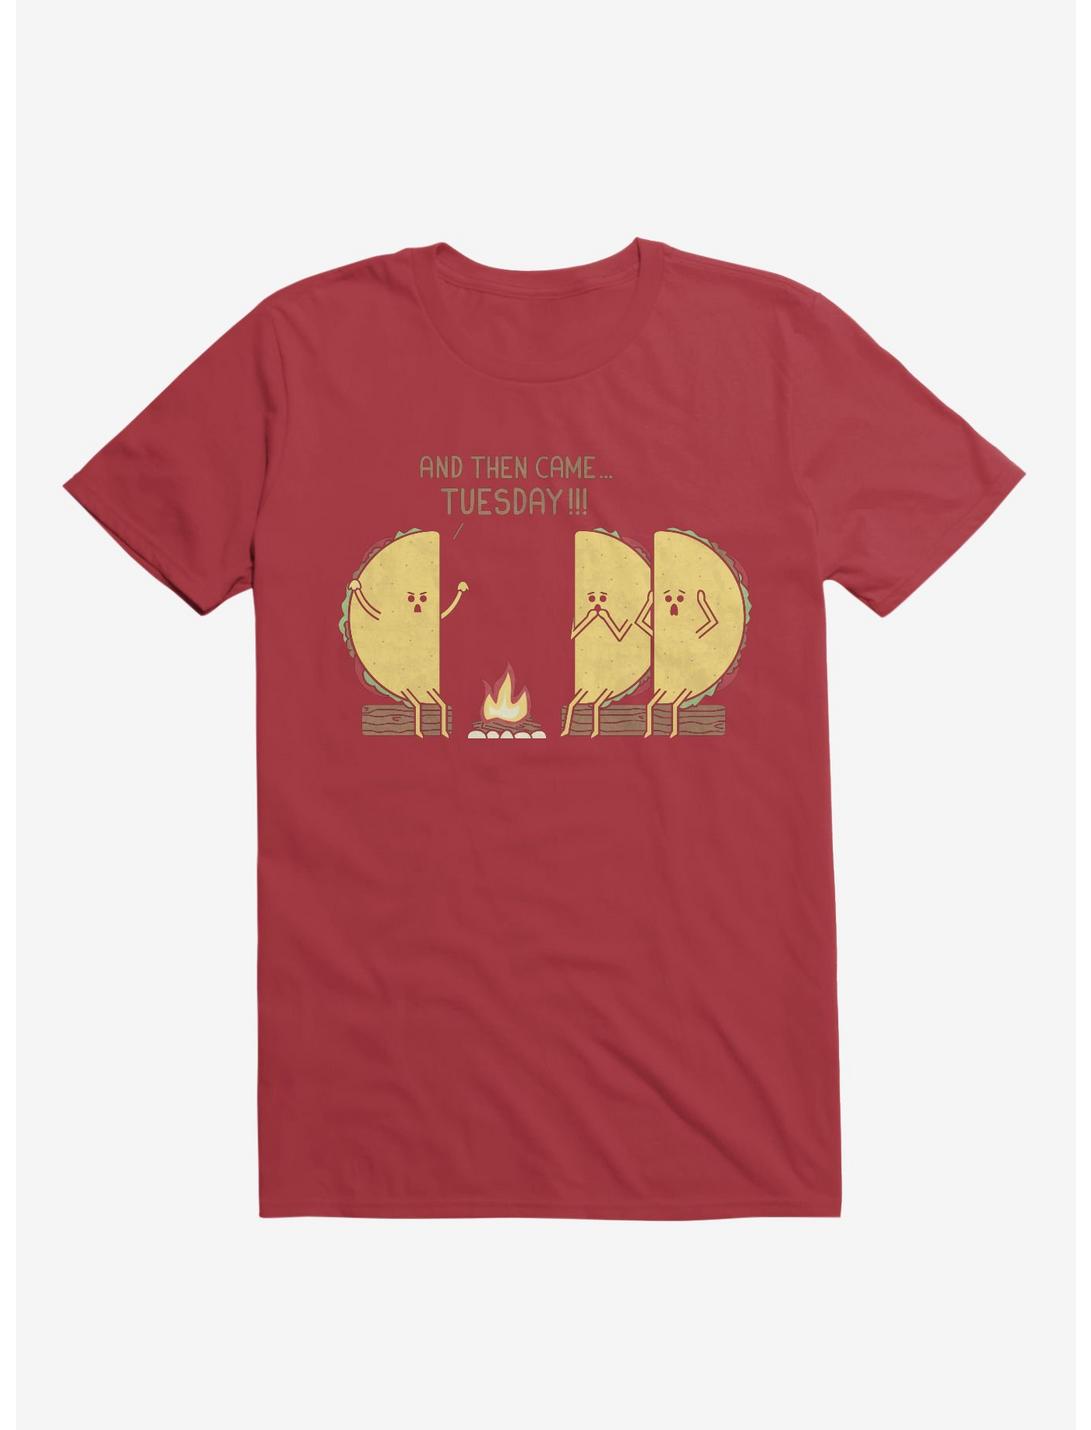 And Then Came... Tuesday!!! Taco Campfire Story Red T-Shirt, RED, hi-res